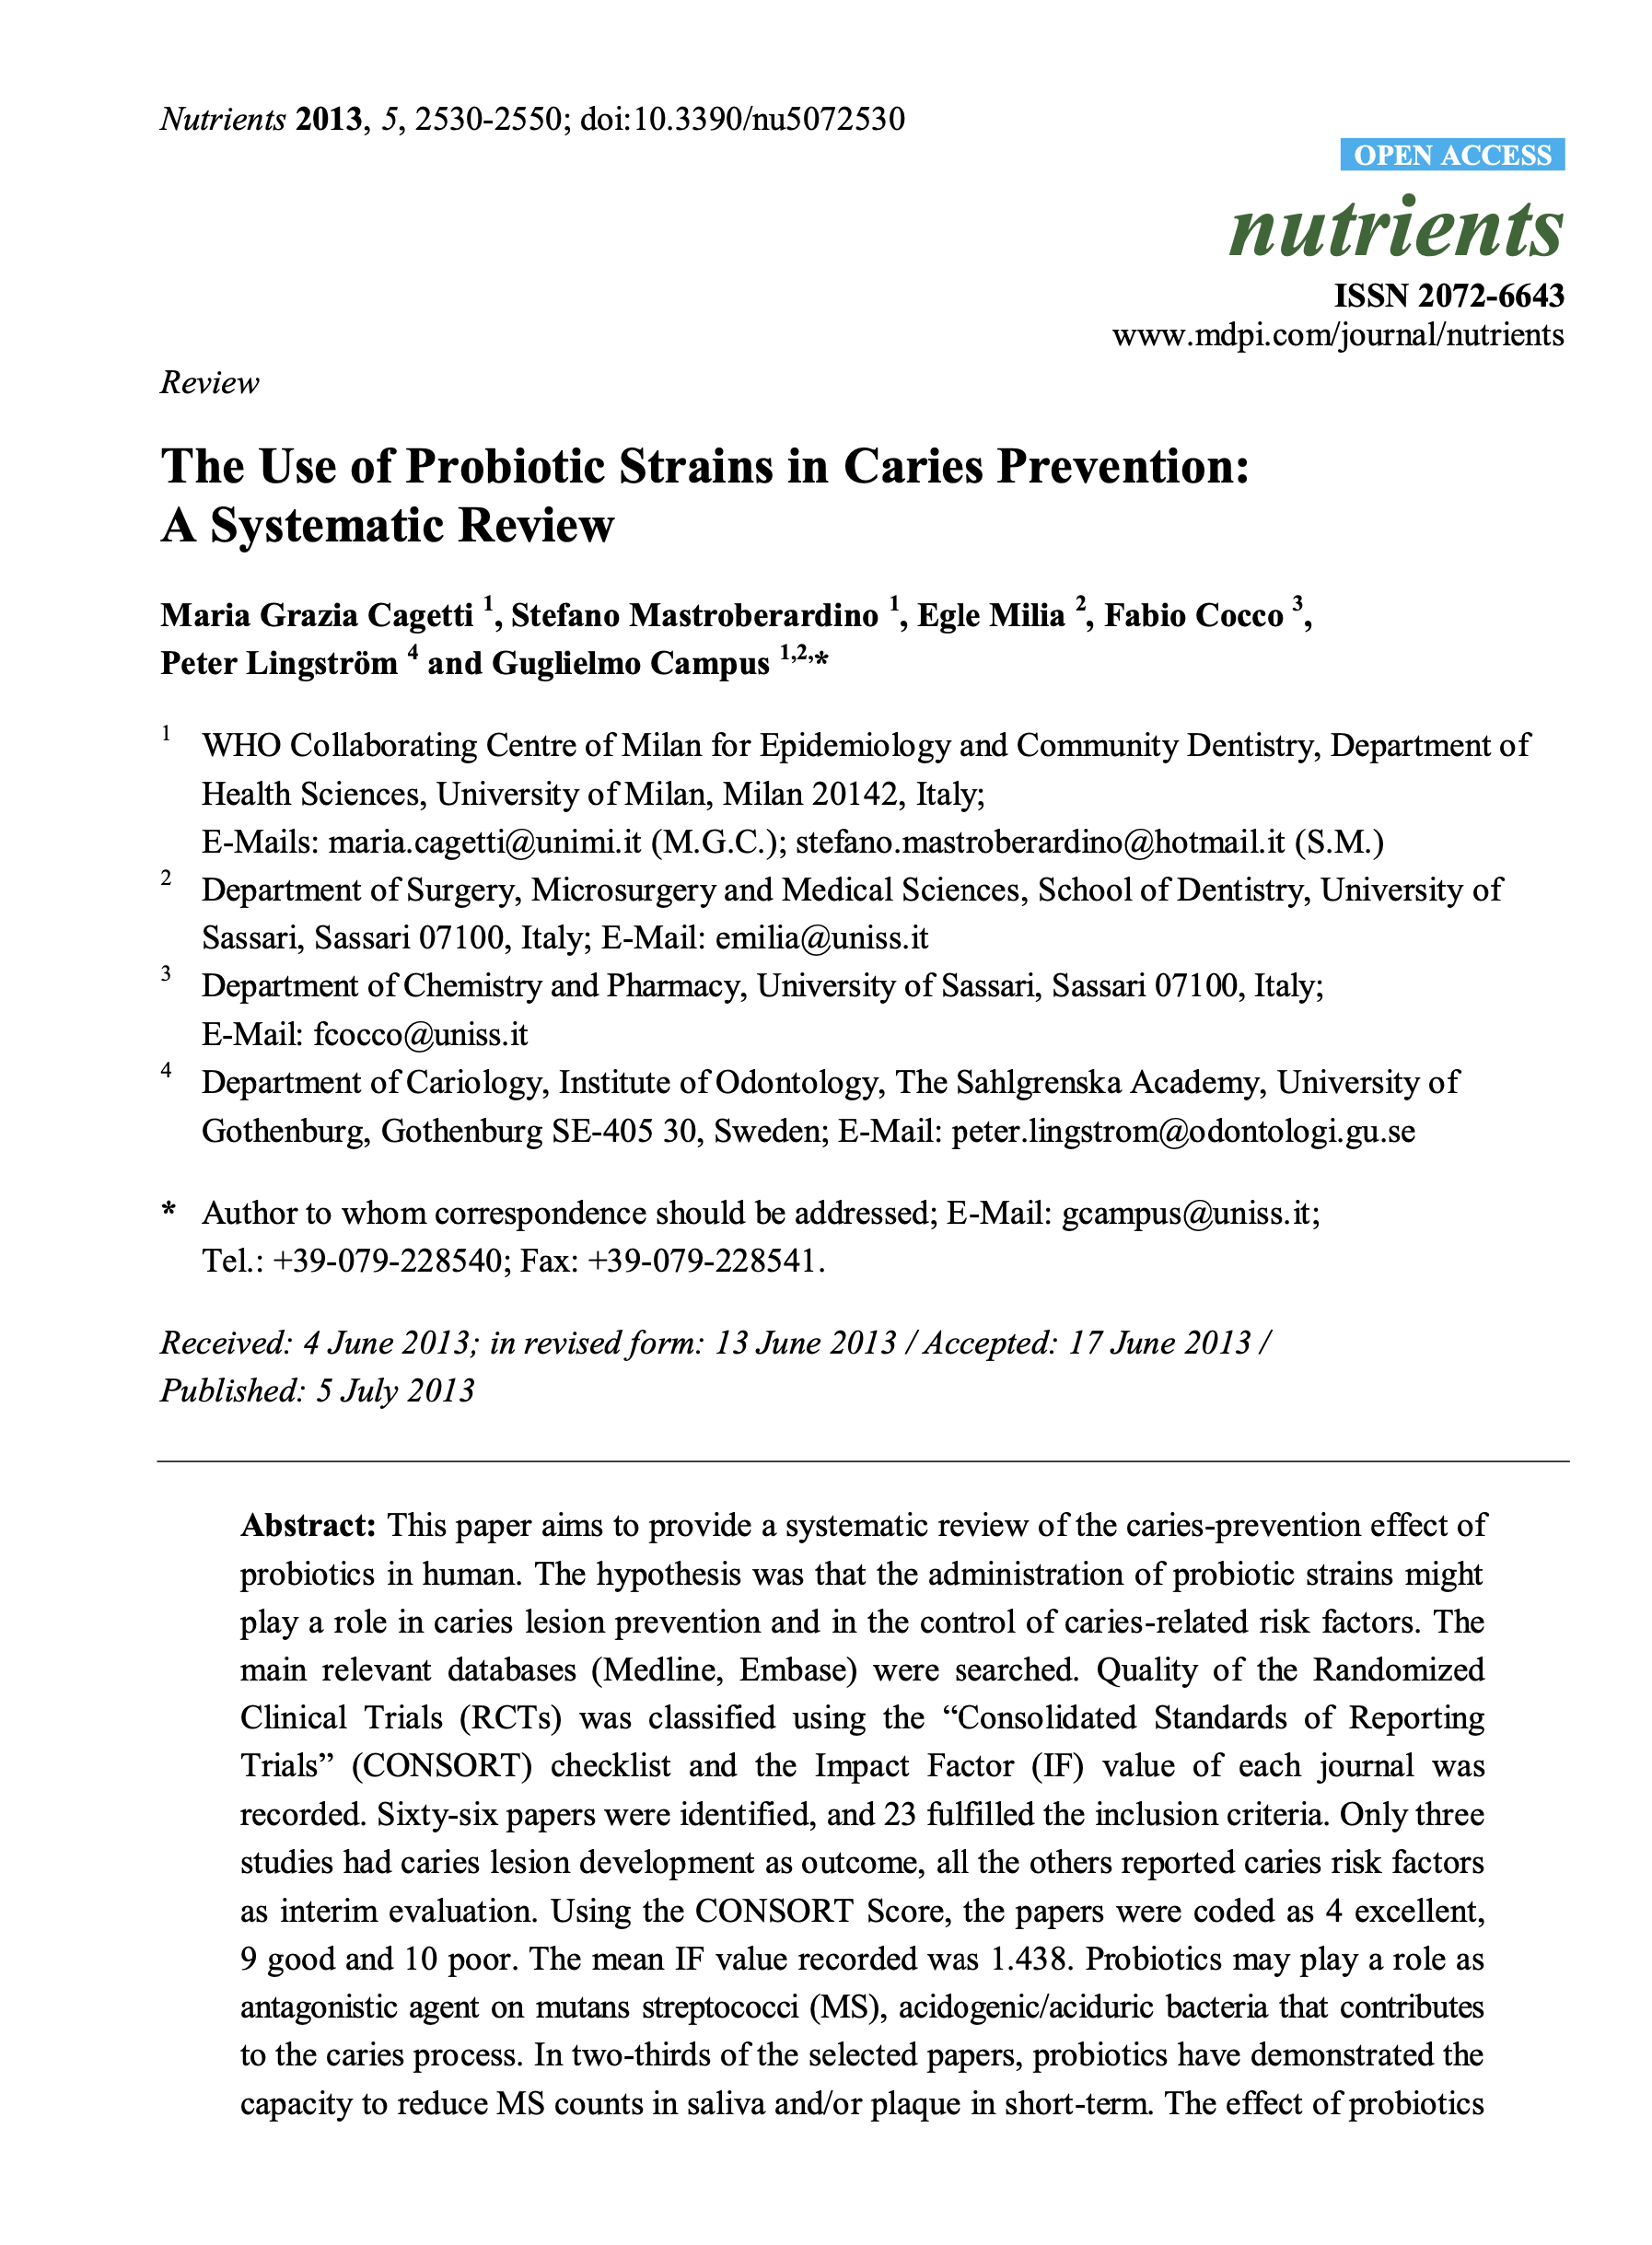 The Use of Probiotic Strains in Caries Prevention